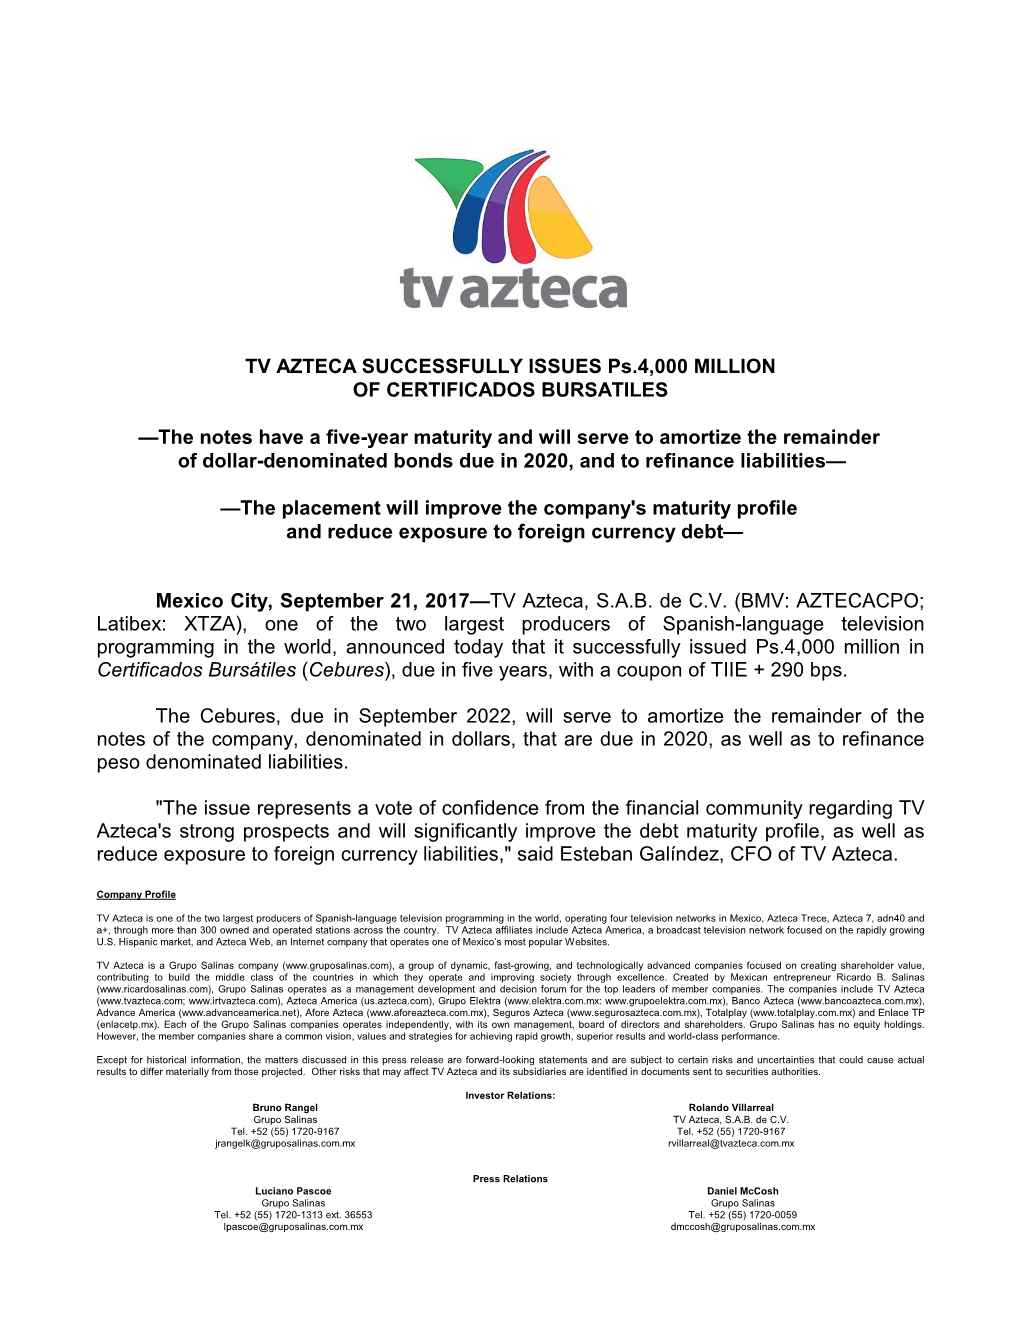 TV AZTECA SUCCESSFULLY ISSUES Ps.4,000 MILLION of CERTIFICADOS BURSATILES —The Notes Have a Five-Year Maturity and Will Serve